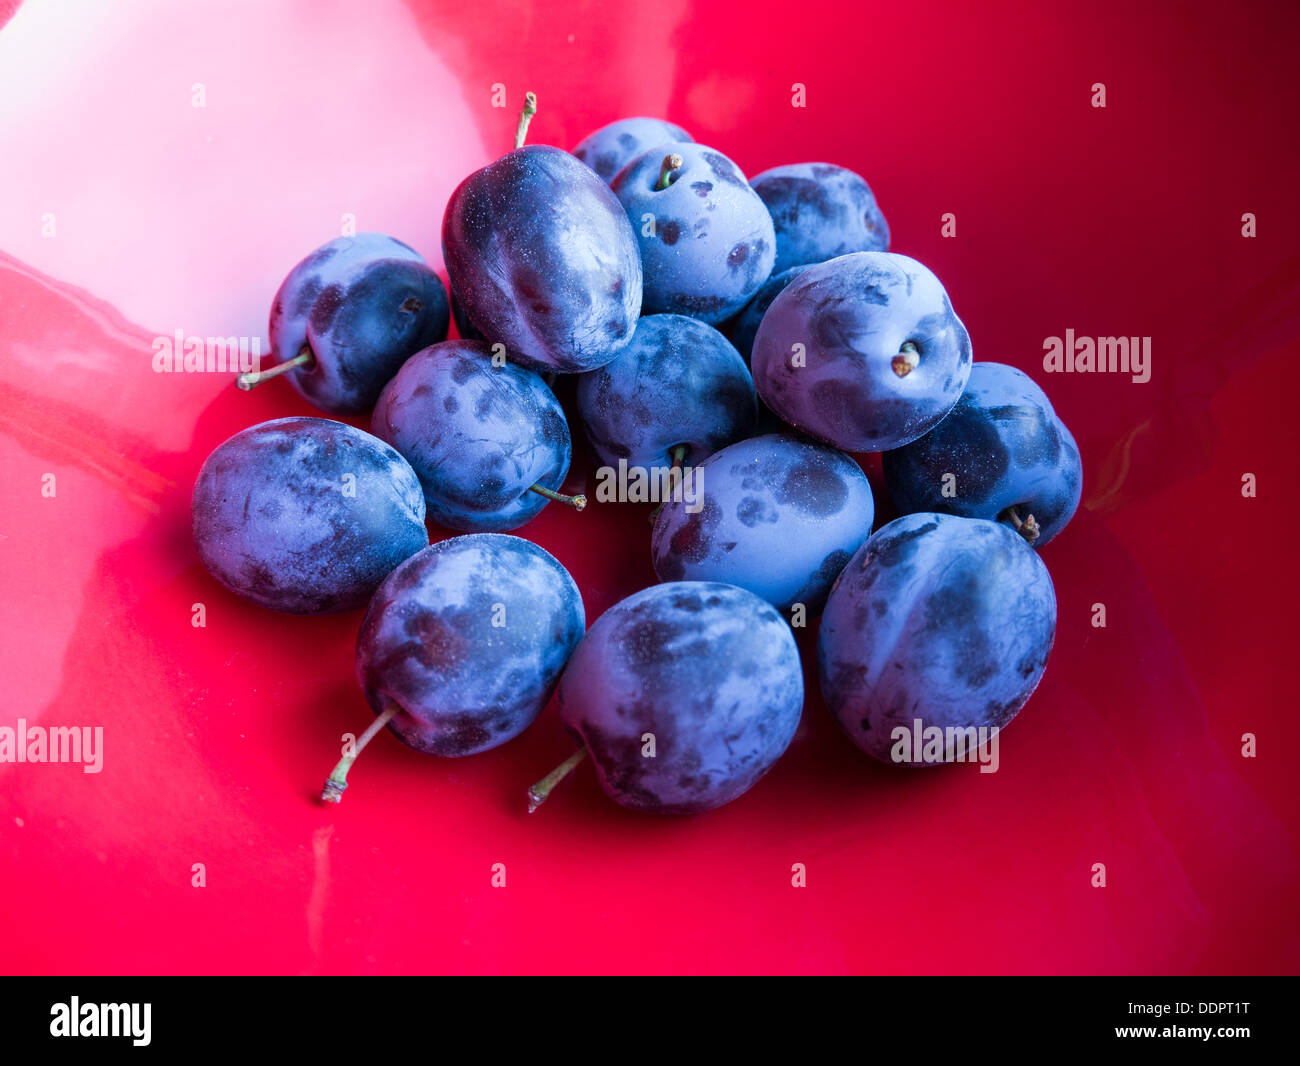 Fresh purple plums in a red bowl Stock Photo